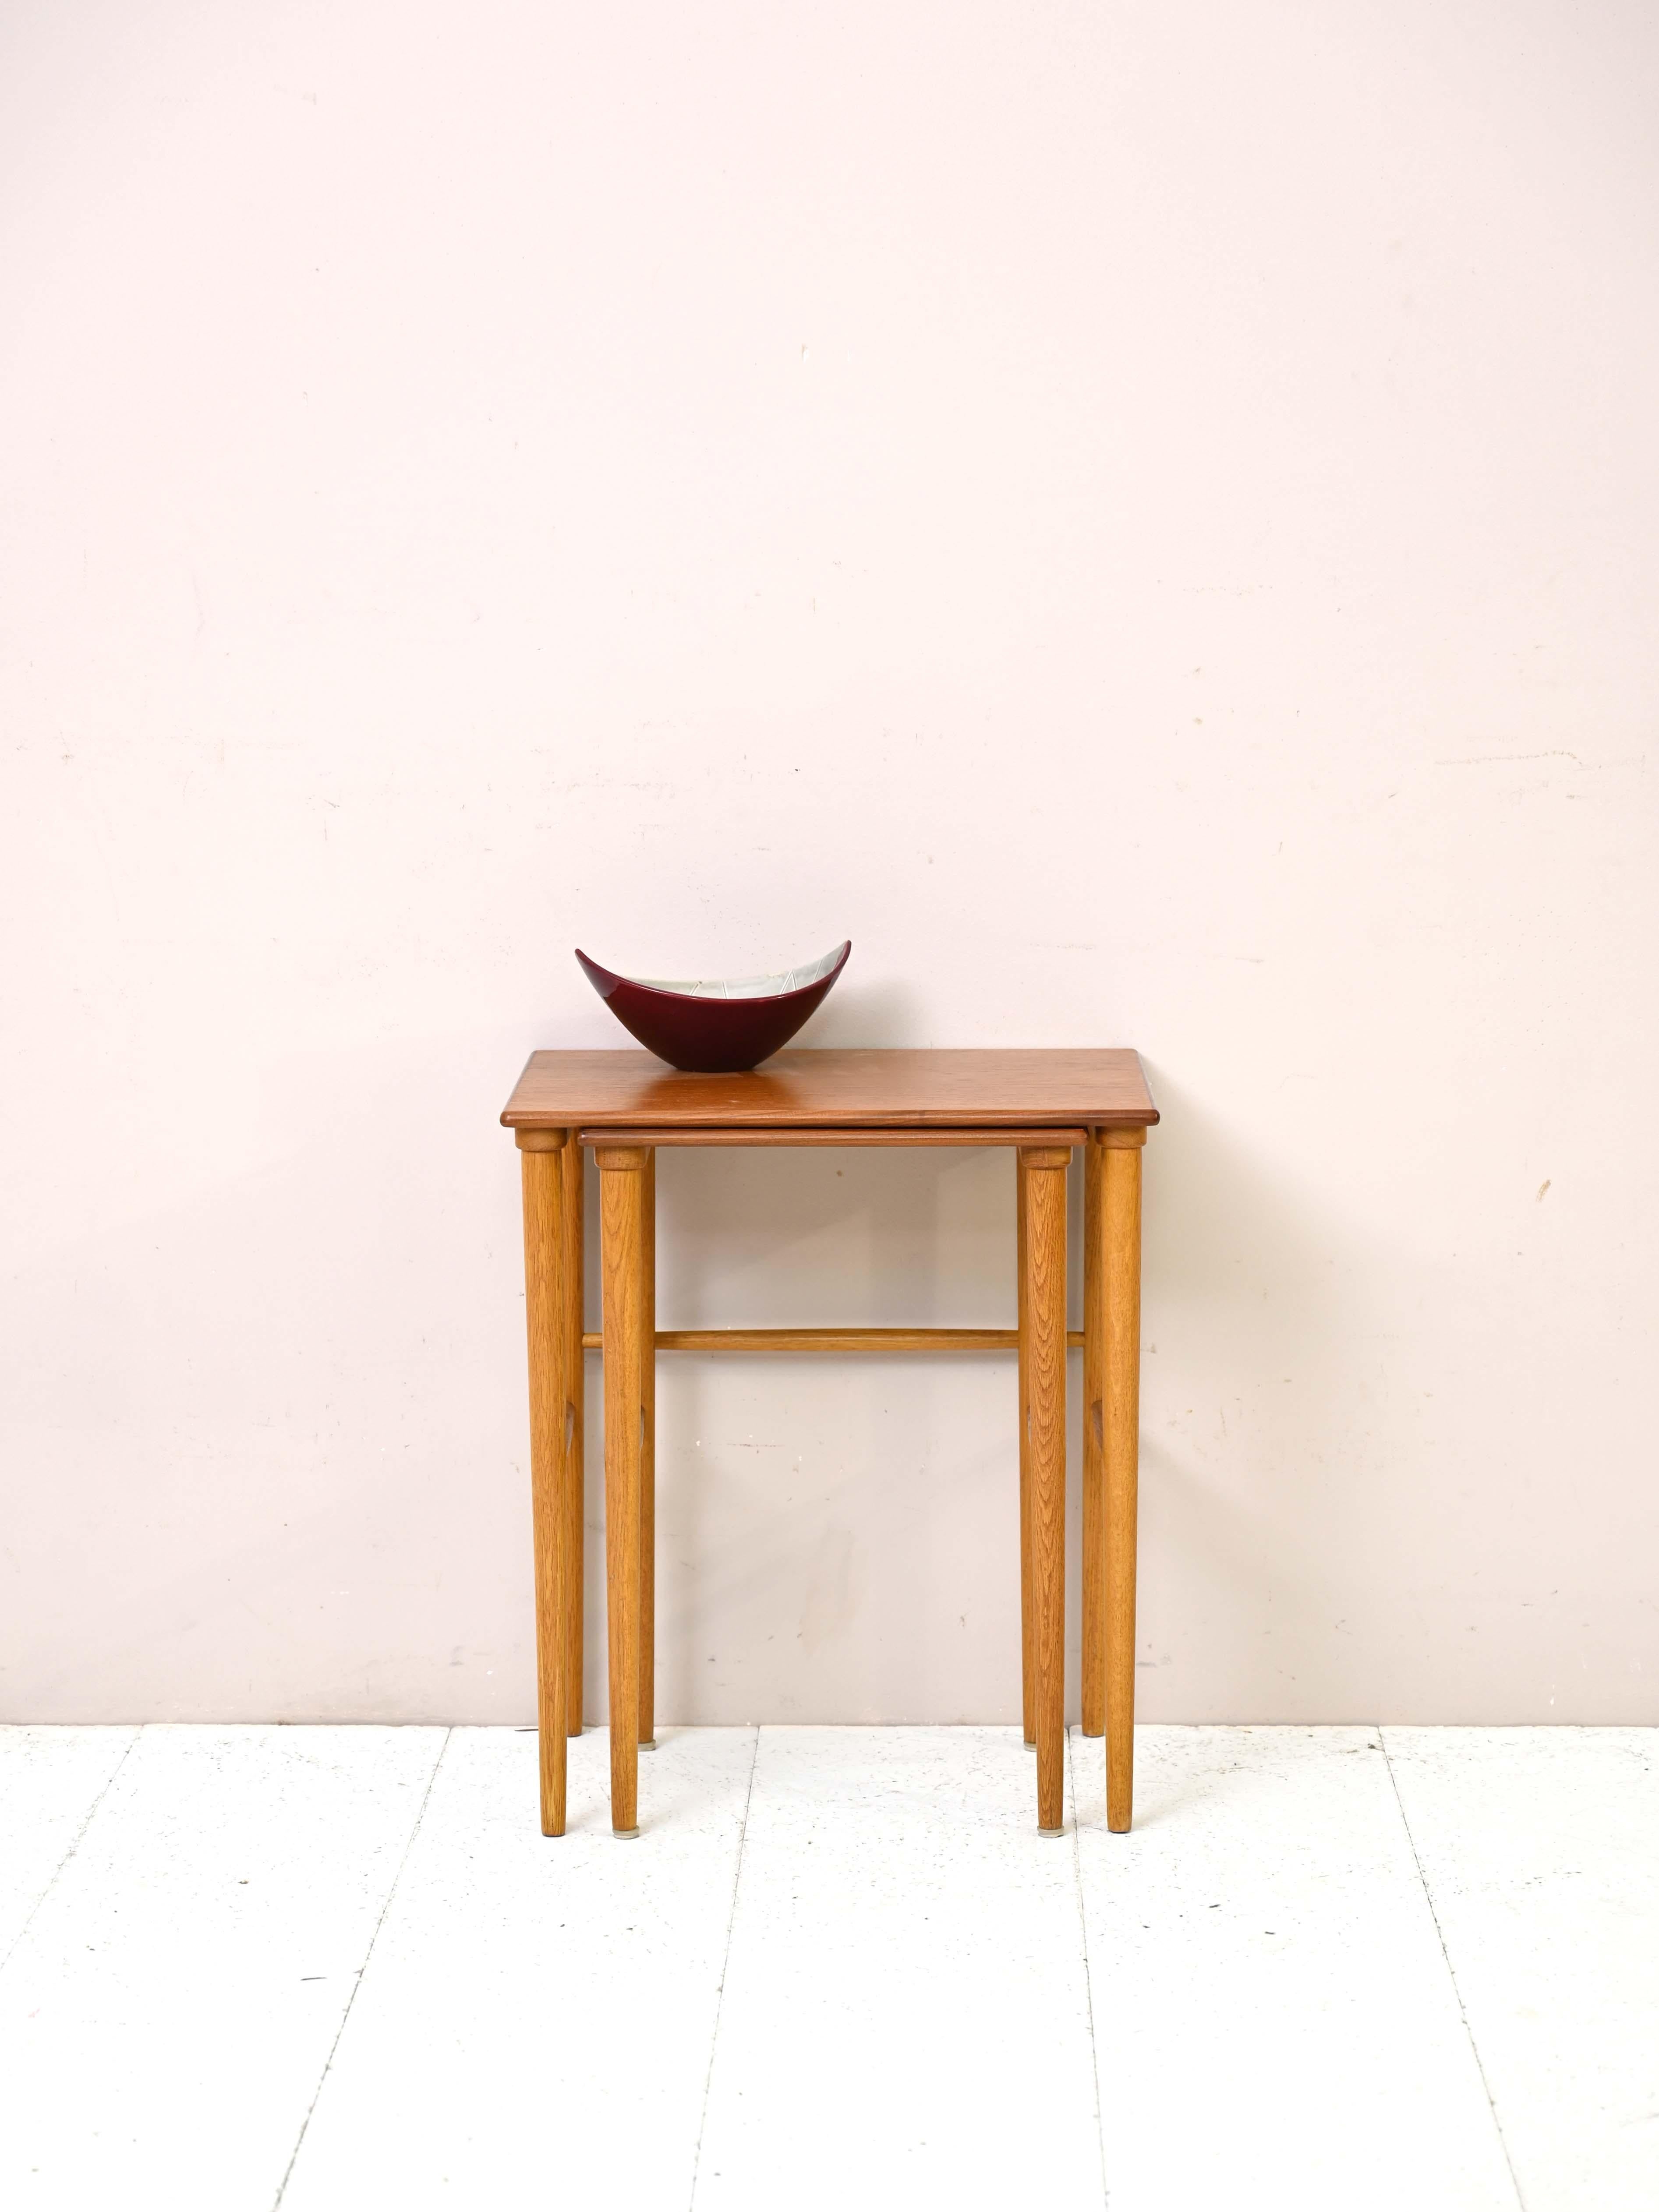 Vintage Scandinavian side tables.

These two small coffee tables are ideal for those who have limited space in the home but do not want to give up a practical and visually pleasing tabletop.
Consisting of a simple square teak top and long tapered